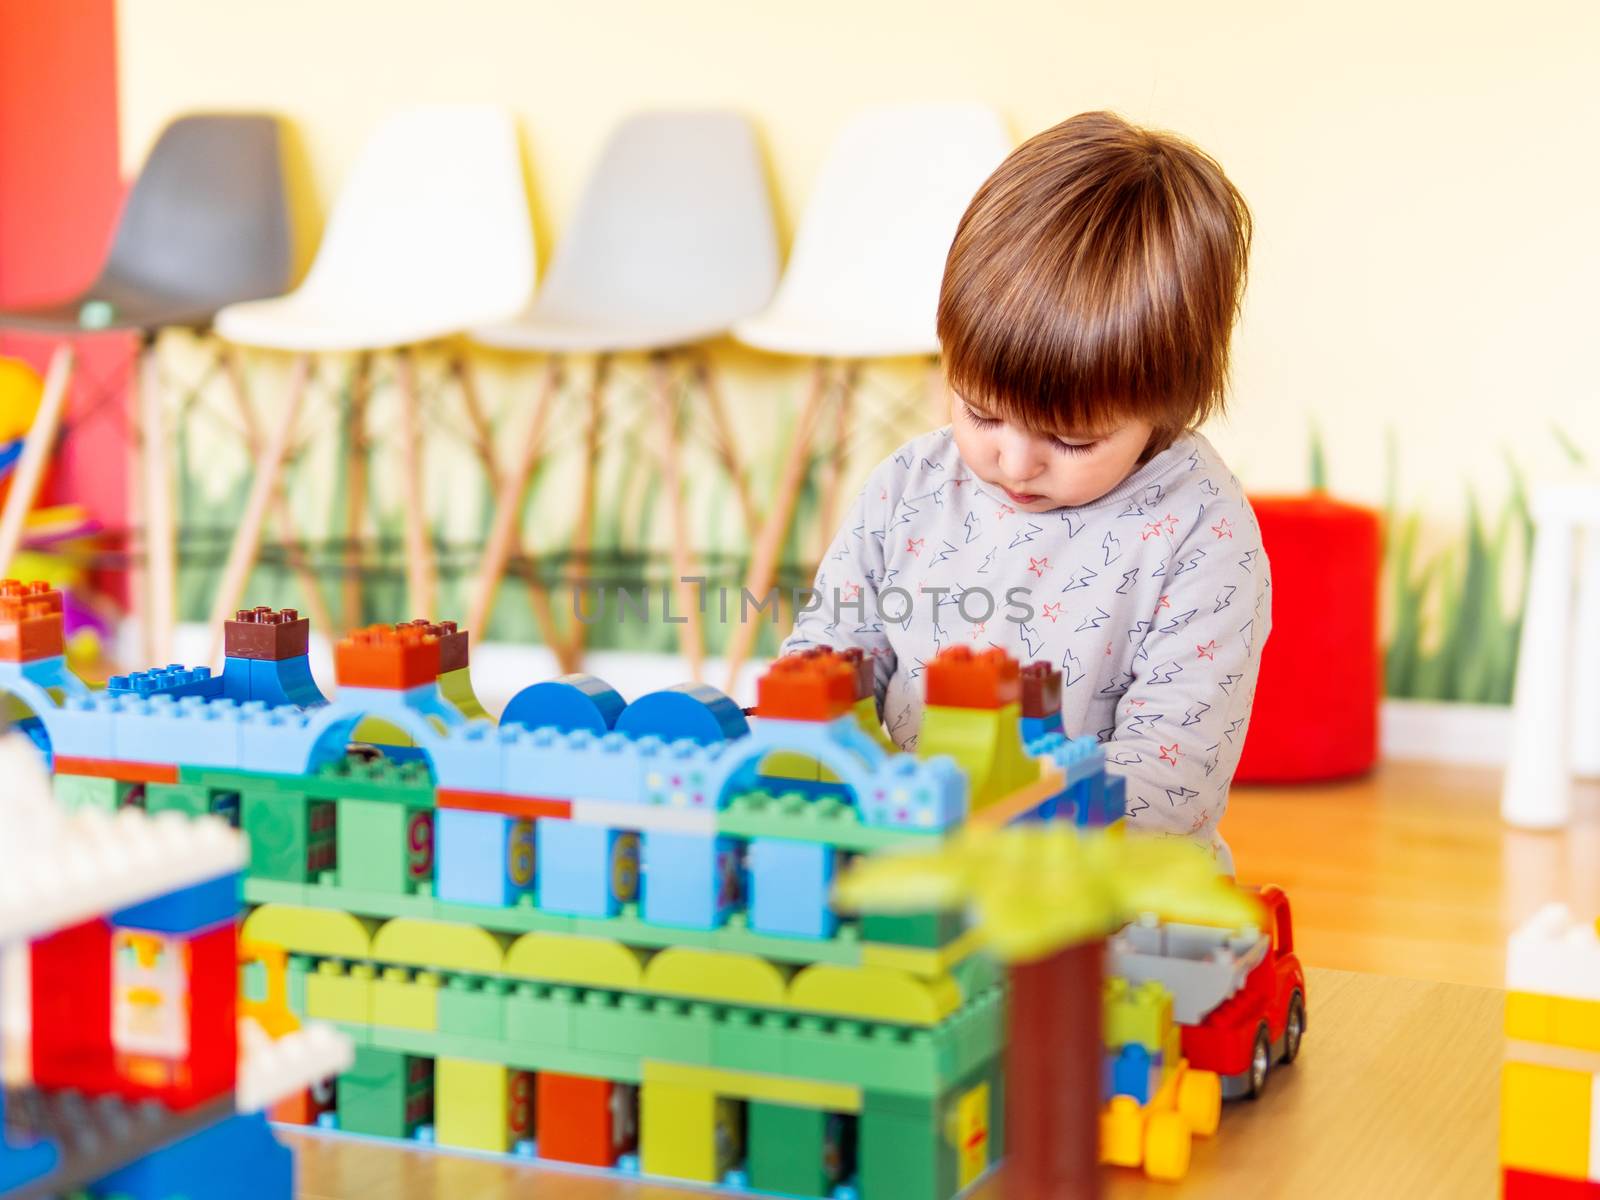 Little boy playing in nurseroom with colorful constructor. Educational toy block in toddler hands. Kid is busy with toy bricks.